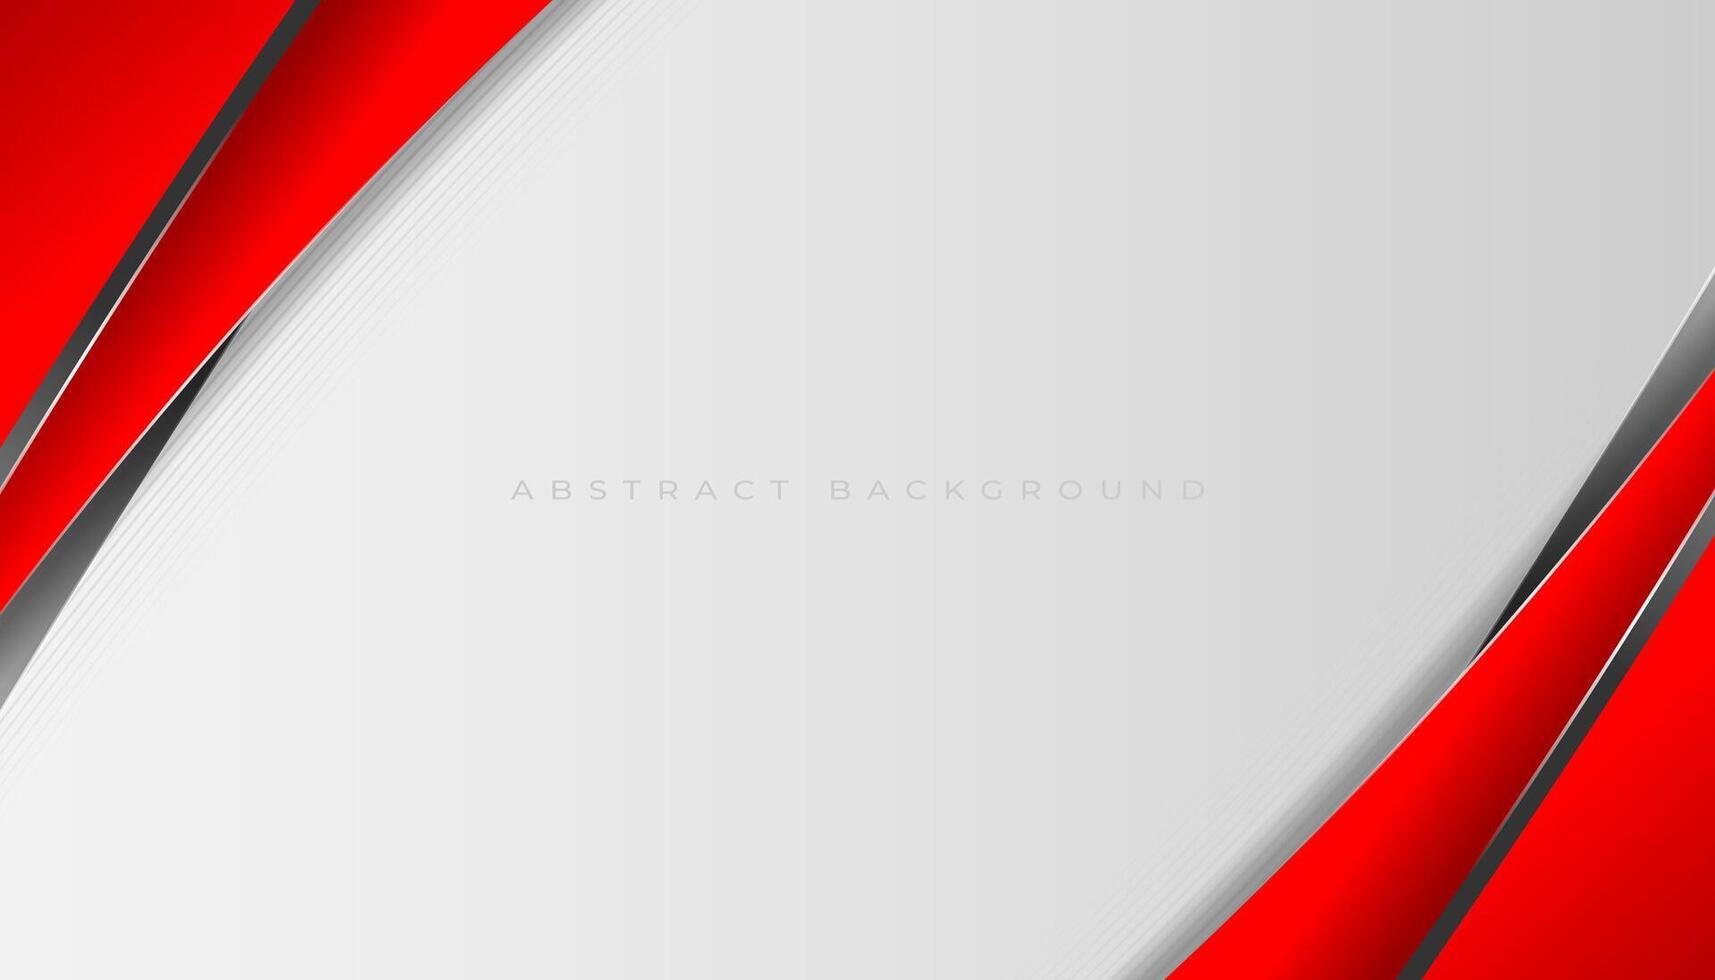 Abstract red gray gray white blank space modern futuristic background vector illustration design.